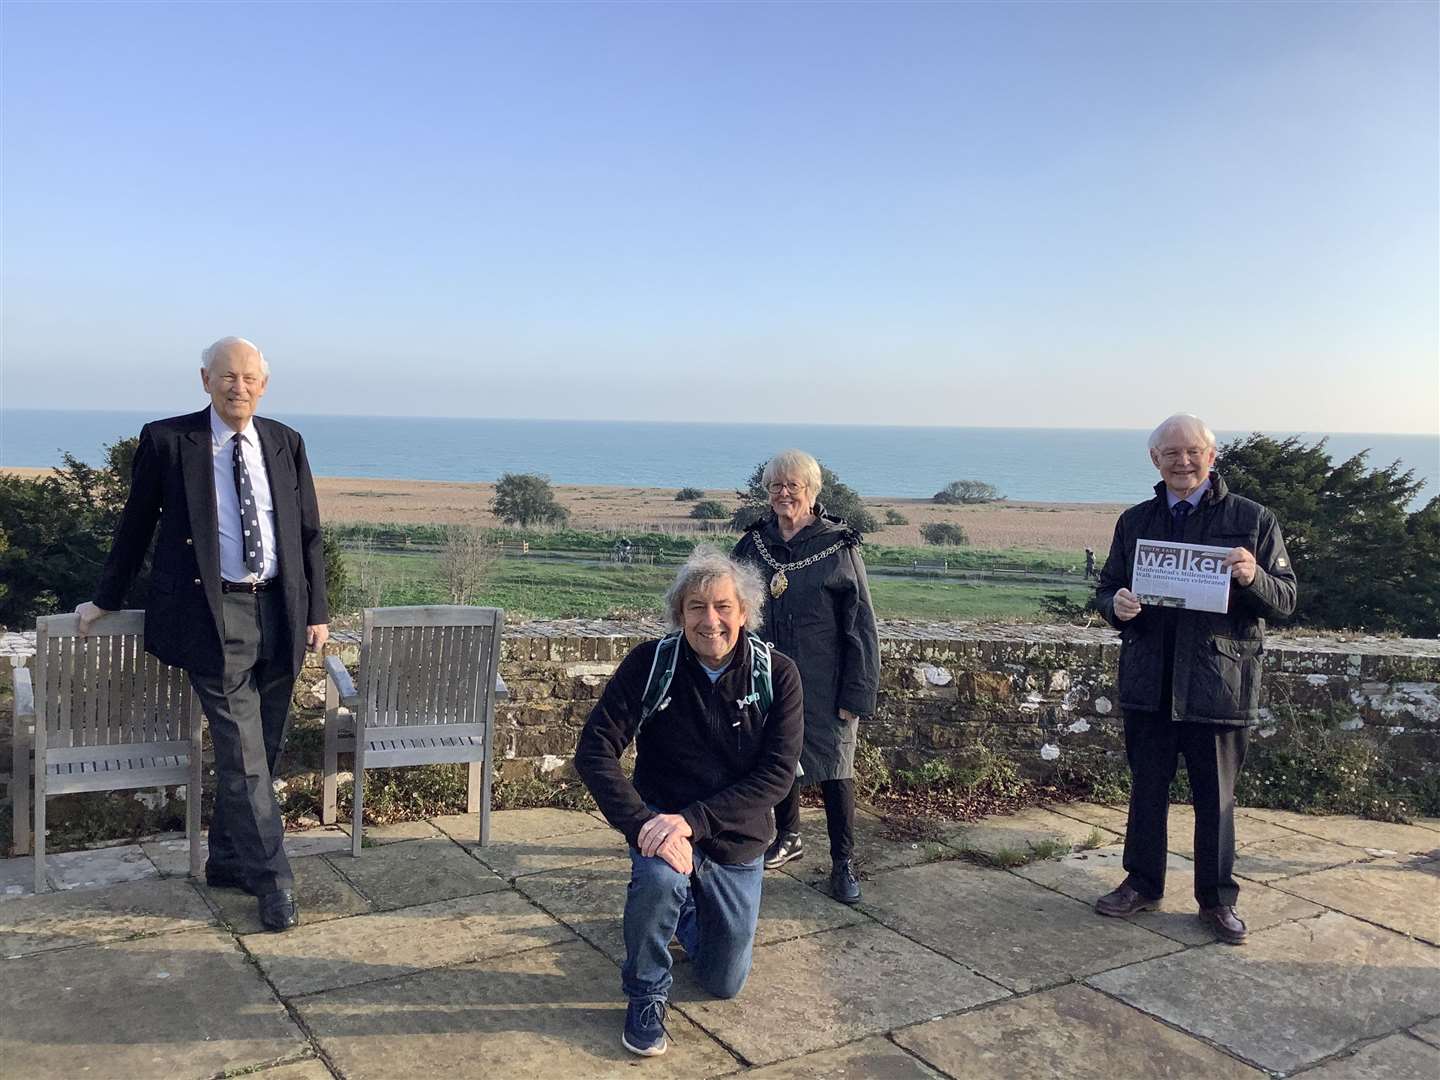 Pictured at Walmer Castle promoting Deal being a Walkers Are Welcome town are, from left , Admiral the Lord Boyce, Lord Warden of the Cinque Ports; Graham Smith from the White Cliffs Ramblers; Cllr Eileen Rowbotham,Mayor of Deal; and Bill Butler, who is chairing the Deal Welcomes Walkers steering group